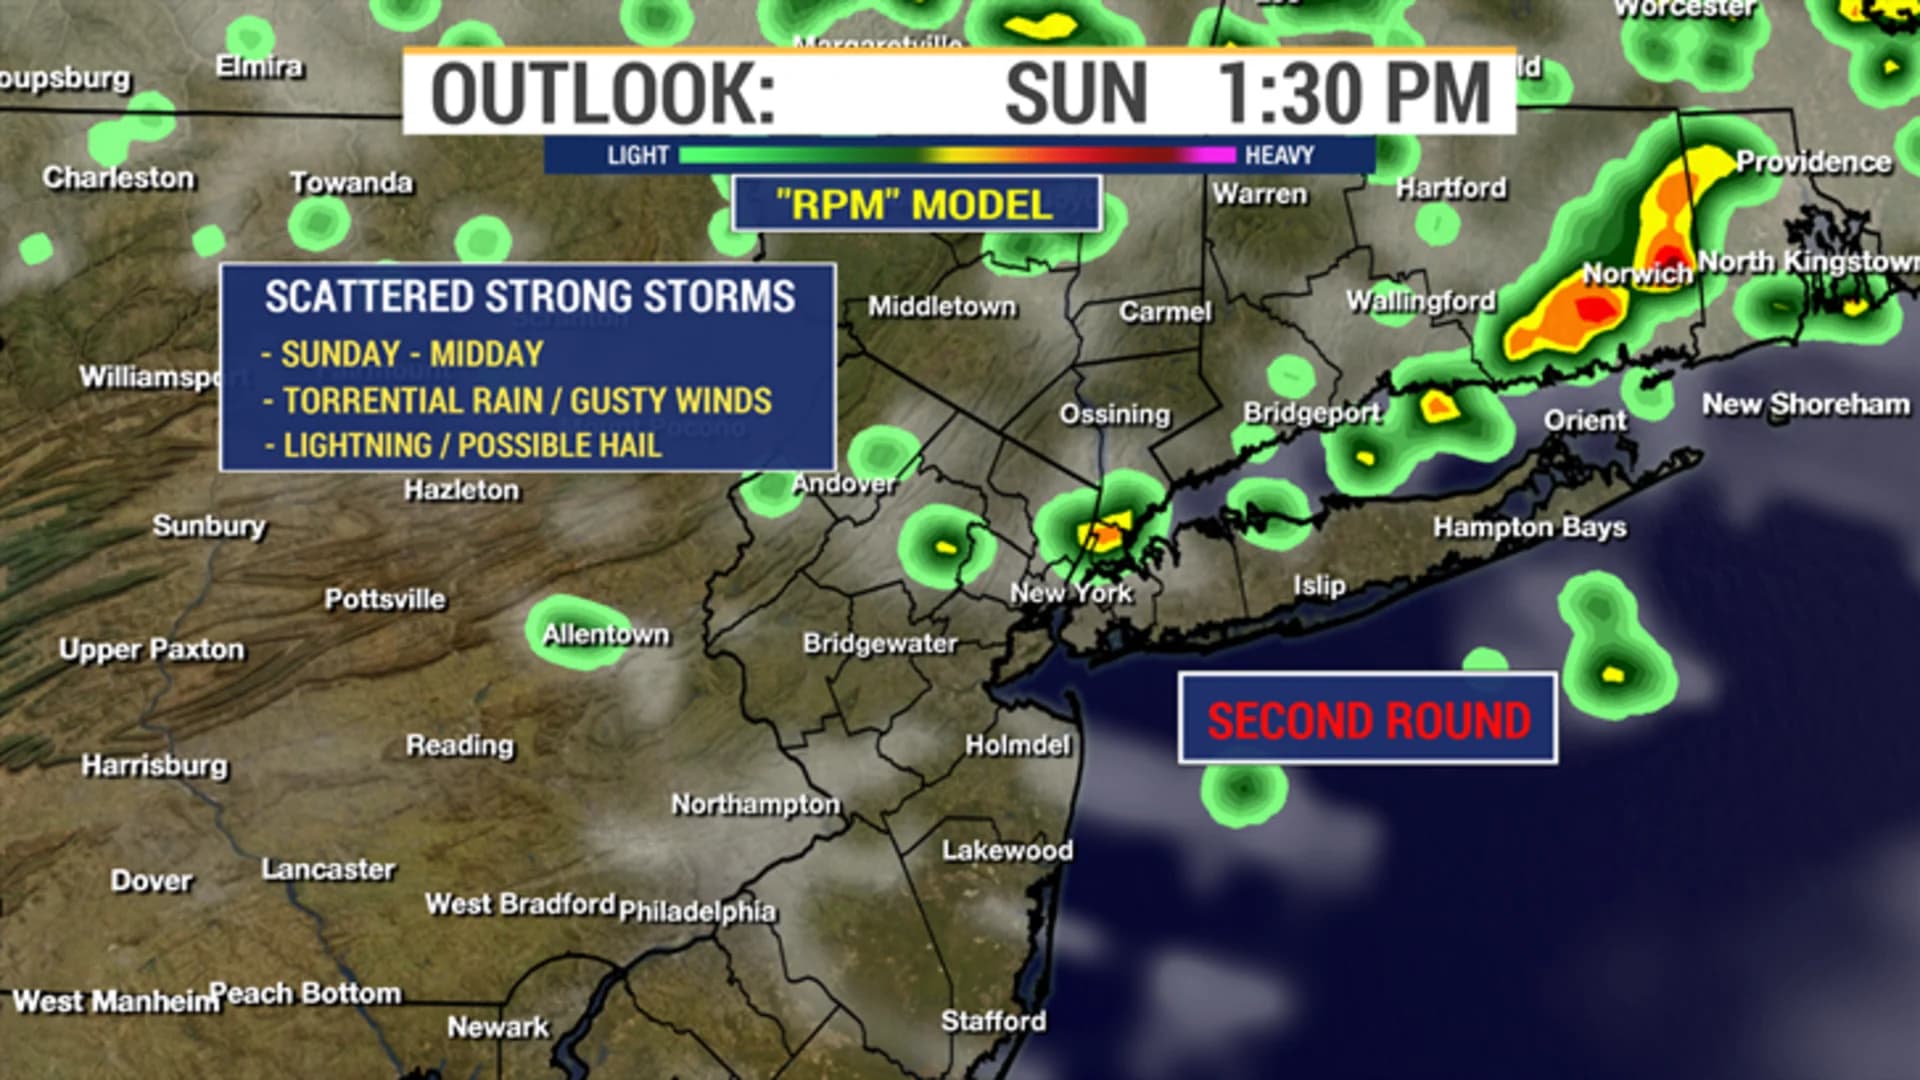 More thunderstorms possible across New Jersey Sunday